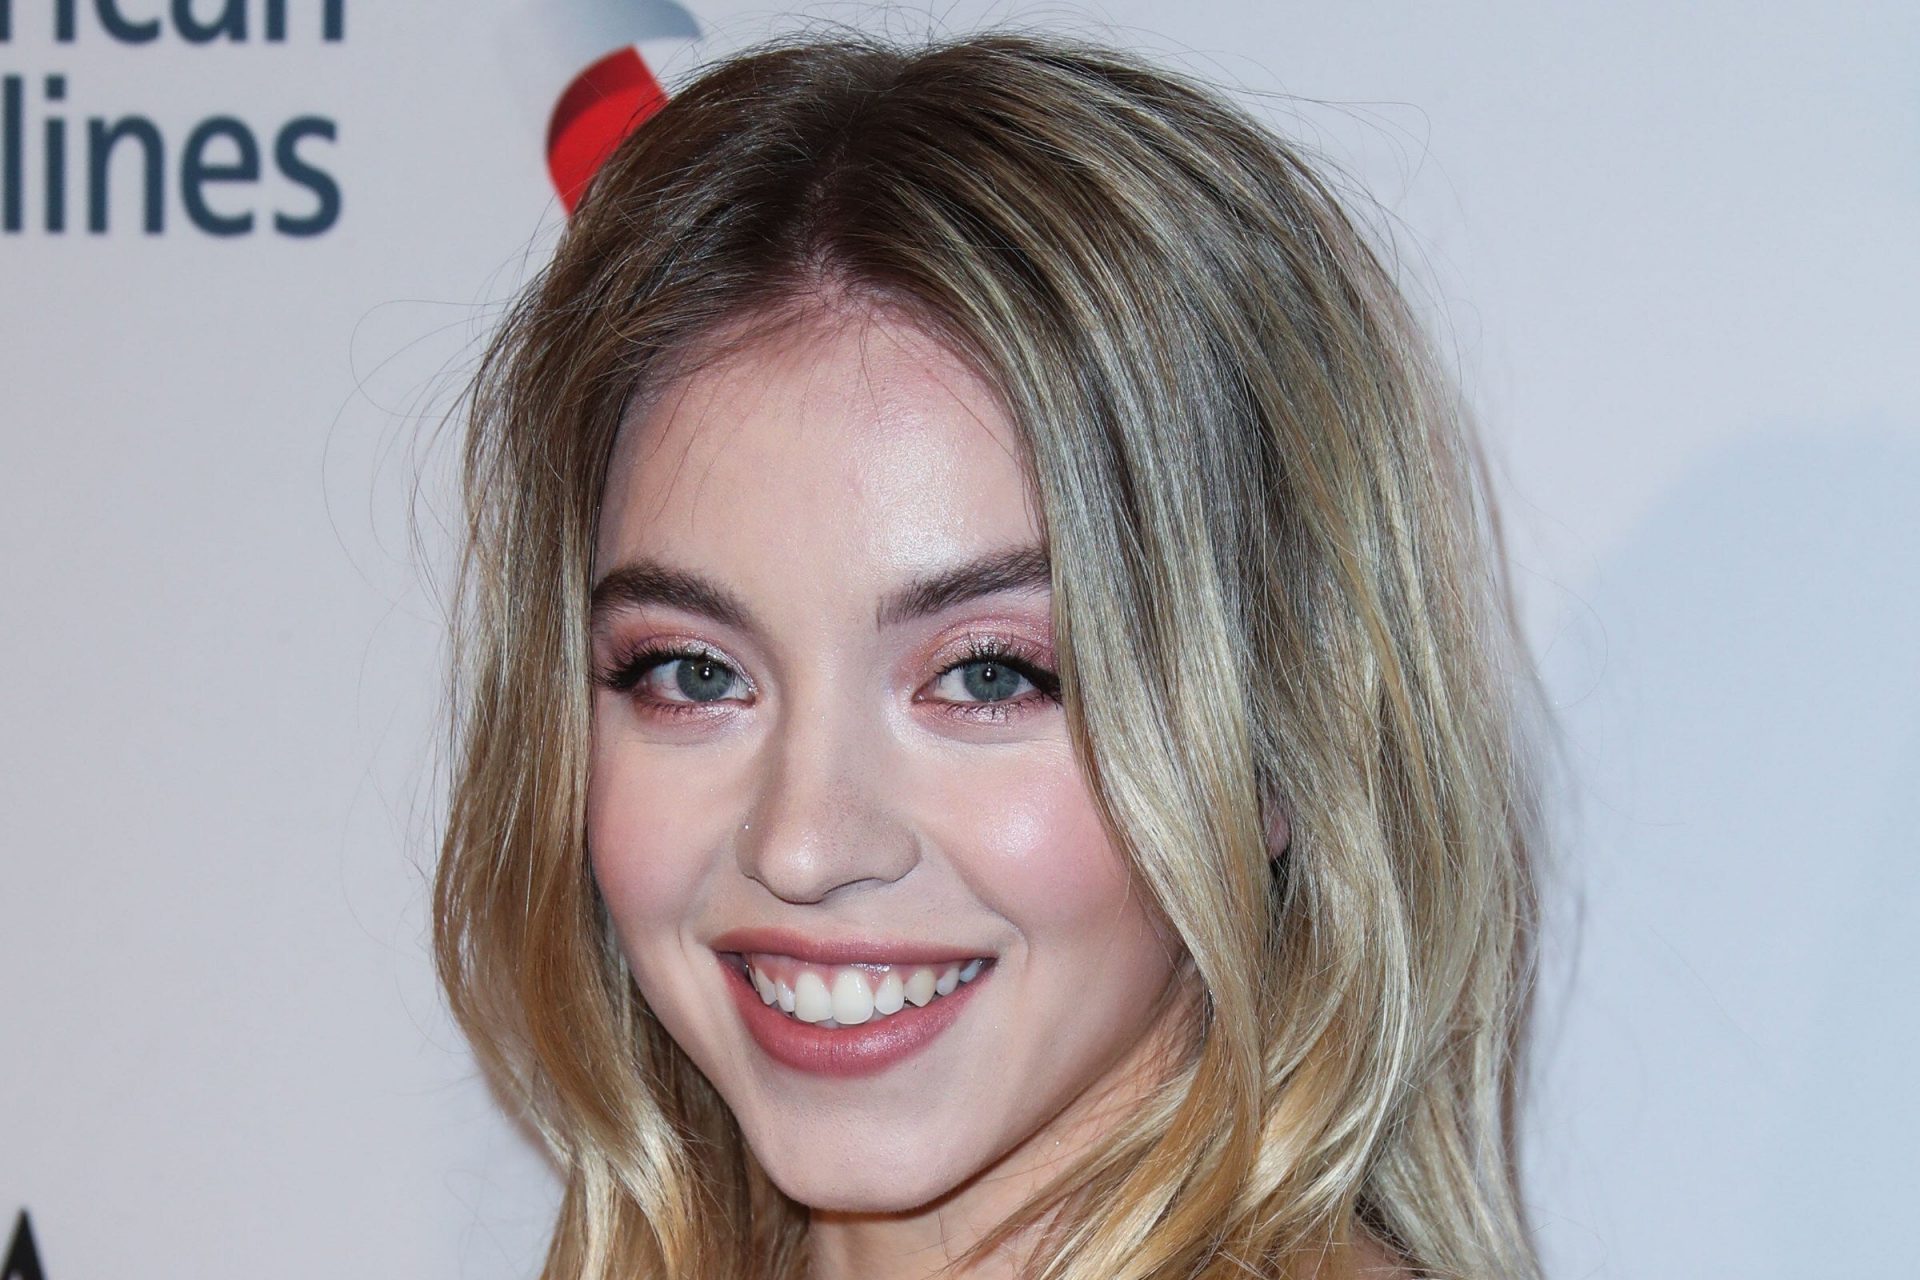 25 Pieces Of Instagram Gold From Sydney Sweeney’s Account